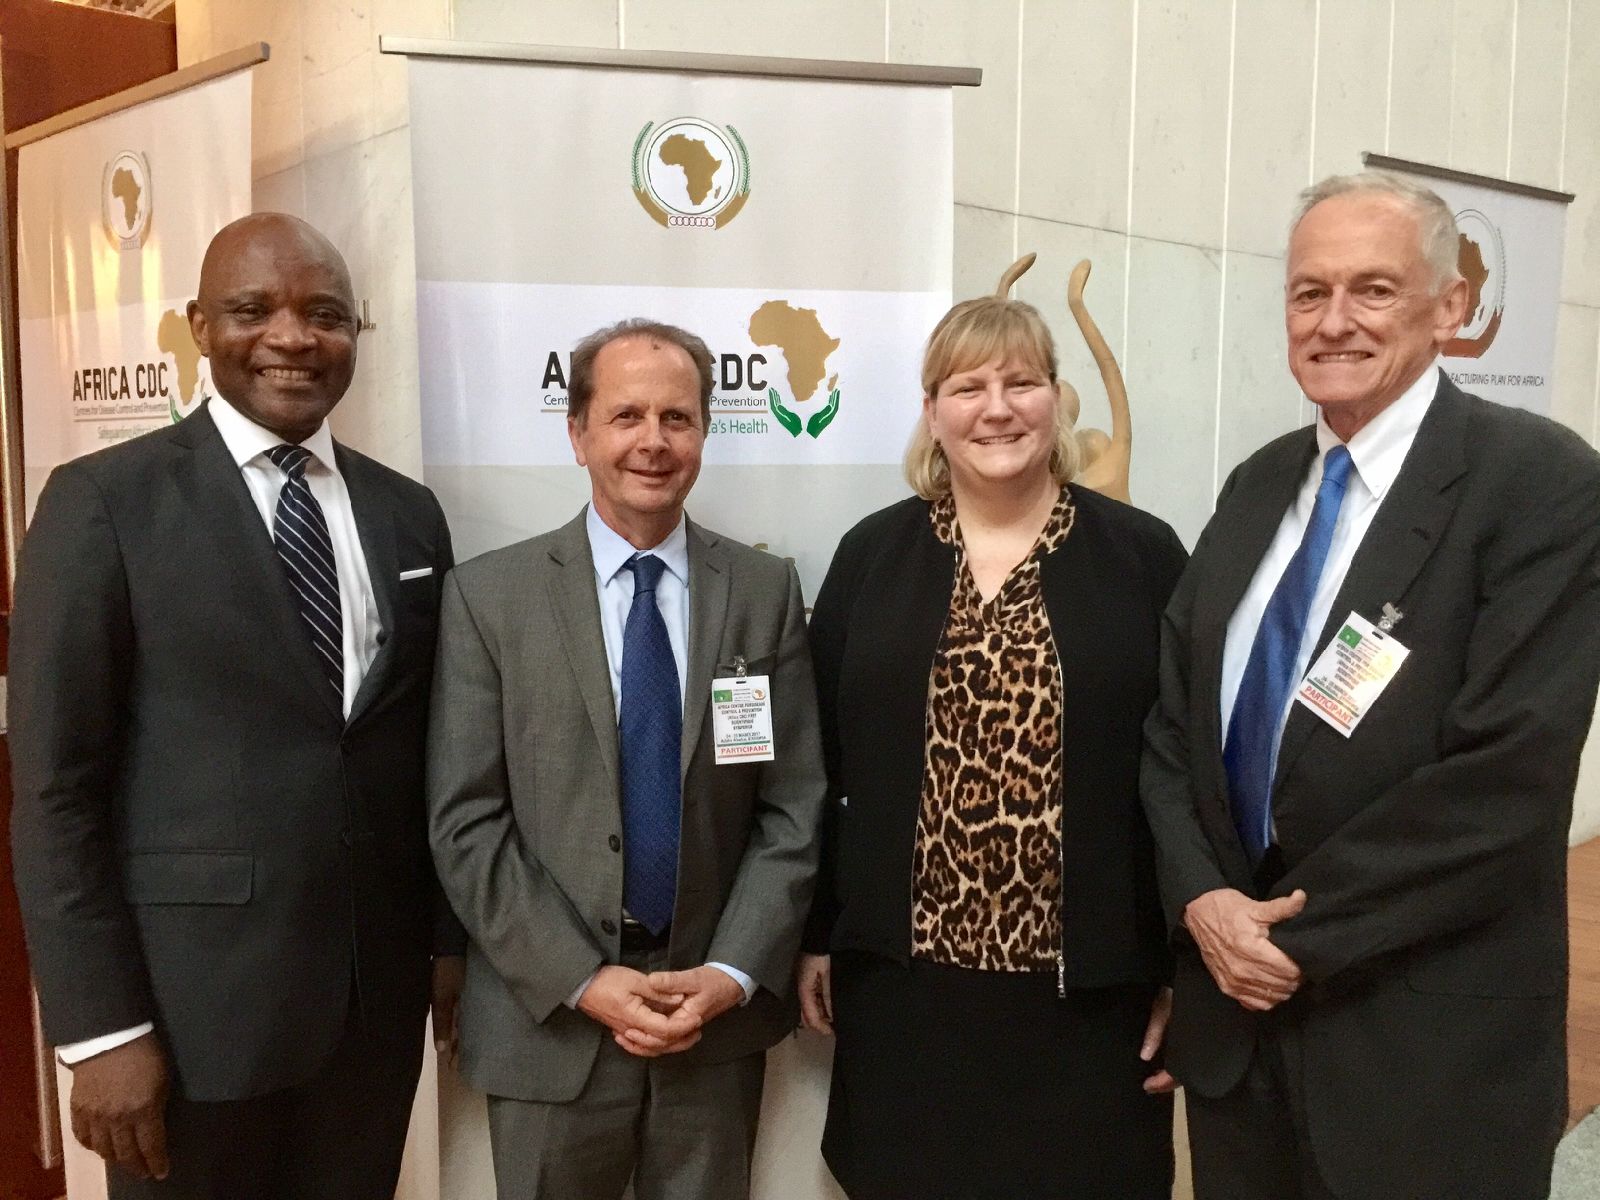 (From left to right) First Africa CDC Director, John Nkengasong, former CGH Director, Tom Kenyon, CGH Director,  Rebecca Martin, and former CGH Director, Kevin de Cock.